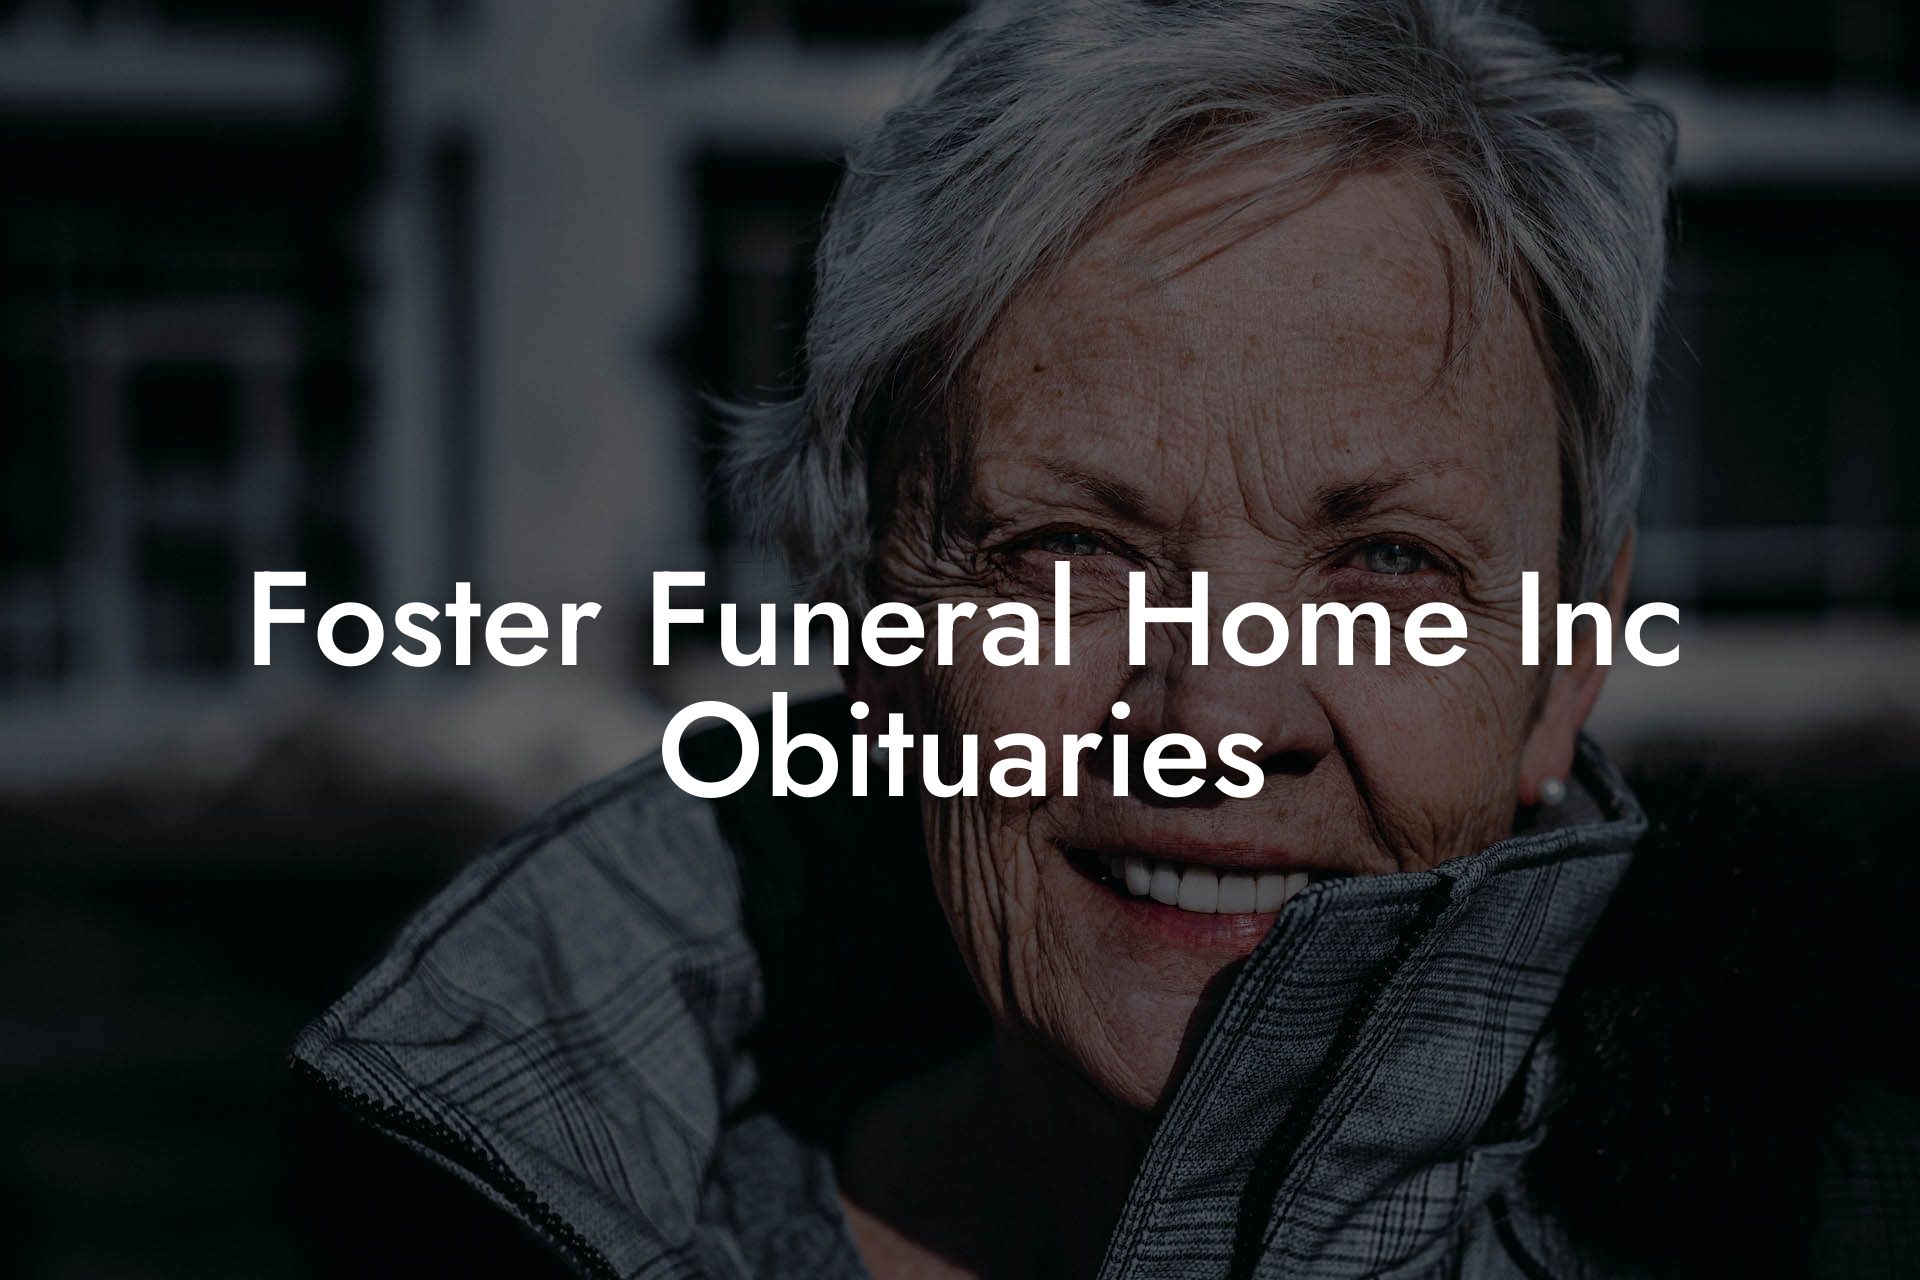 Foster Funeral Home Inc Obituaries